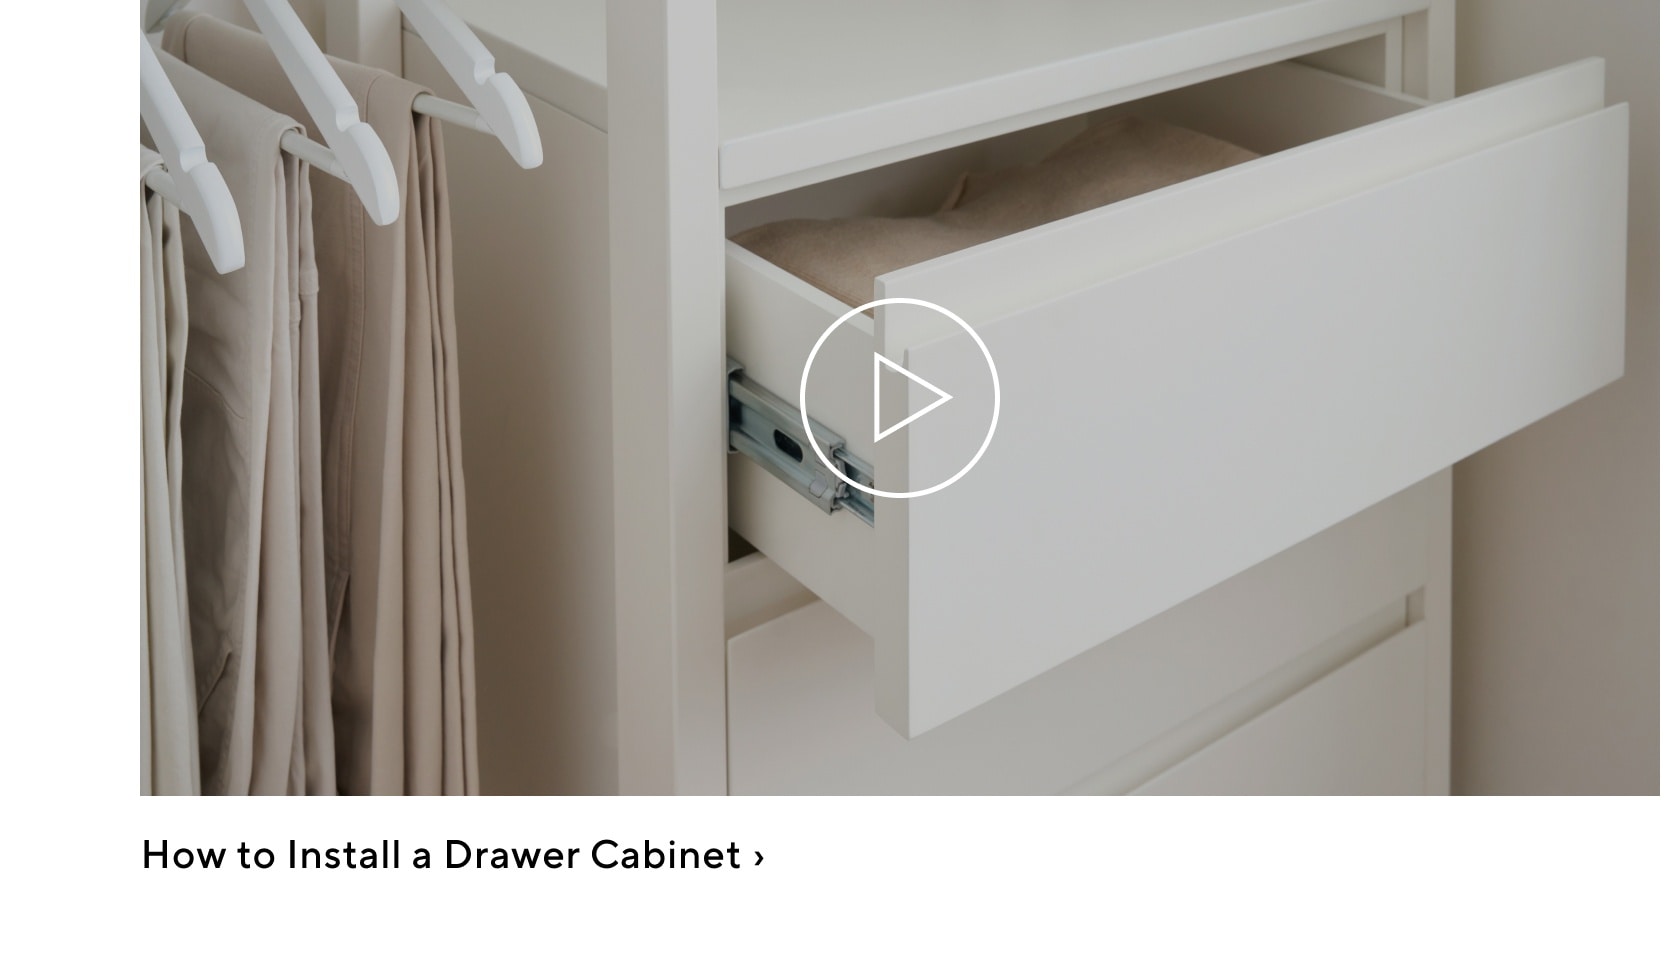 How to Install a Drawer Cabinet